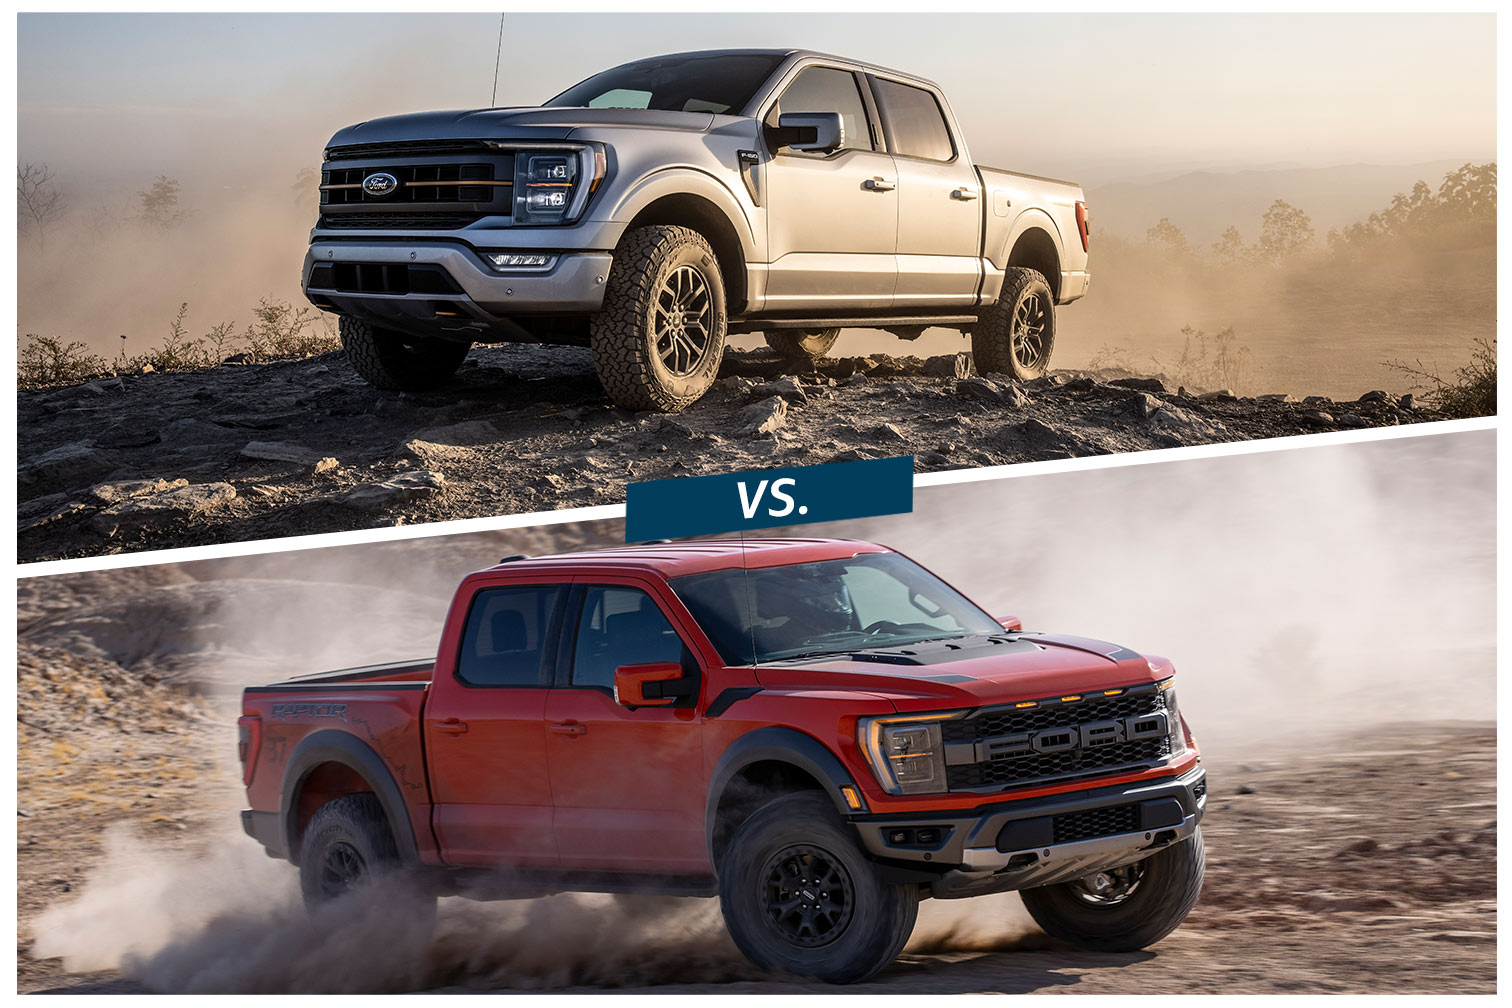 2023 Ford F-150 Tremor in silver above 2023 Ford F-150 Raptor in red